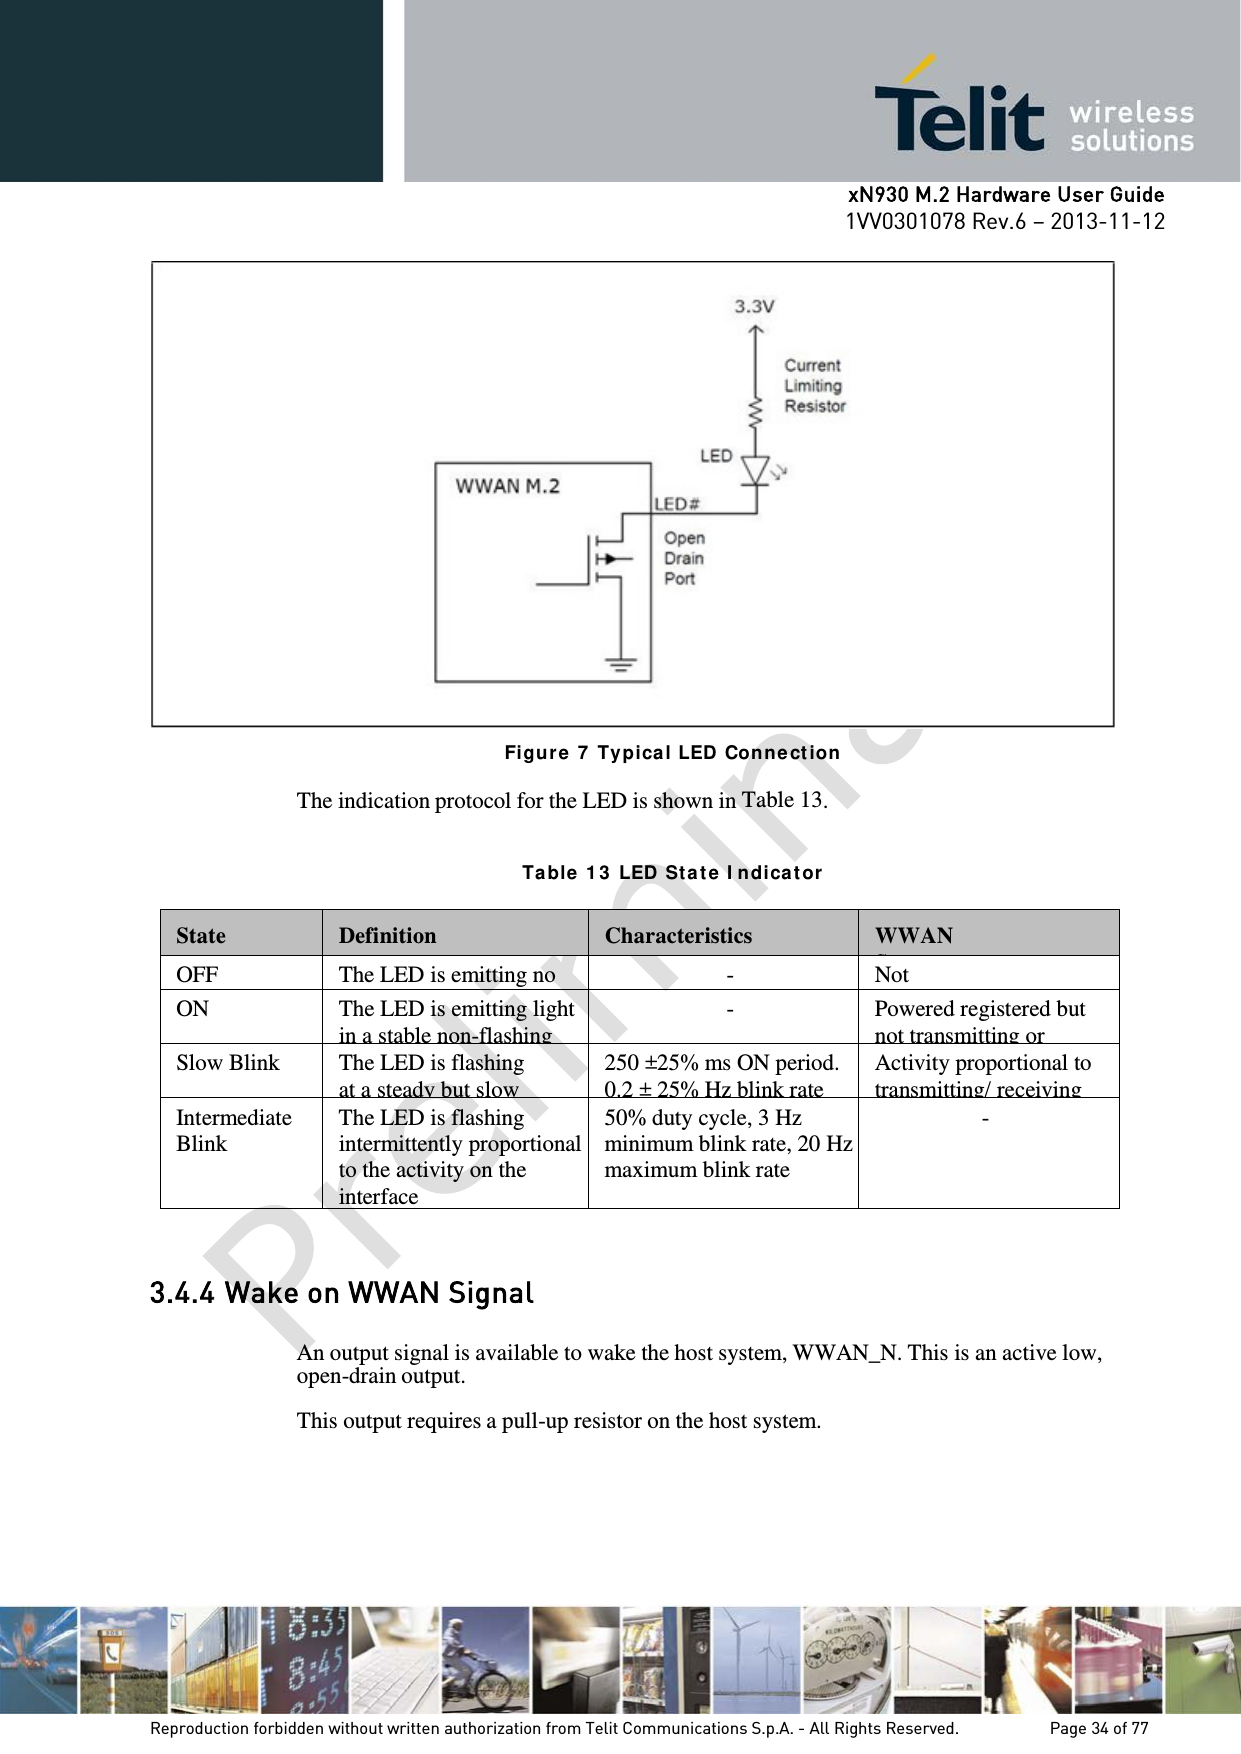      xN930 M.2 Hardware User Guide 1VV0301078 Rev.6 – 2013-11-12     Figur e 7  Ty pica l LED  Con ne ct ion  The indication protocol for the LED is shown in Table 13.   Ta ble  1 3  LED  Sta t e  I ndica t or  State  Definition  Characteristics  WWAN S  OFF The LED is emitting no  - Not   ON The LED is emitting light in a stable non-flashing -  Powered registered but not transmitting or Slow Blink  The LED is flashing at a steady but slow 250 ±25% ms ON period. 0.2 ± 25% Hz blink rate Activity proportional to transmitting/ receiving Intermediate Blink The LED is flashing intermittently proportional to the activity on the interface 50% duty cycle, 3 Hz minimum blink rate, 20 Hz maximum blink rate  -  3.4.4 Wake on WWAN Signal  An output signal is available to wake the host system, WWAN_N. This is an active low, open-drain output.  This output requires a pull-up resistor on the host system.     Reproduction forbidden without written authorization from Telit Communications S.p.A. - All Rights Reserved.    Page 34 of 77 